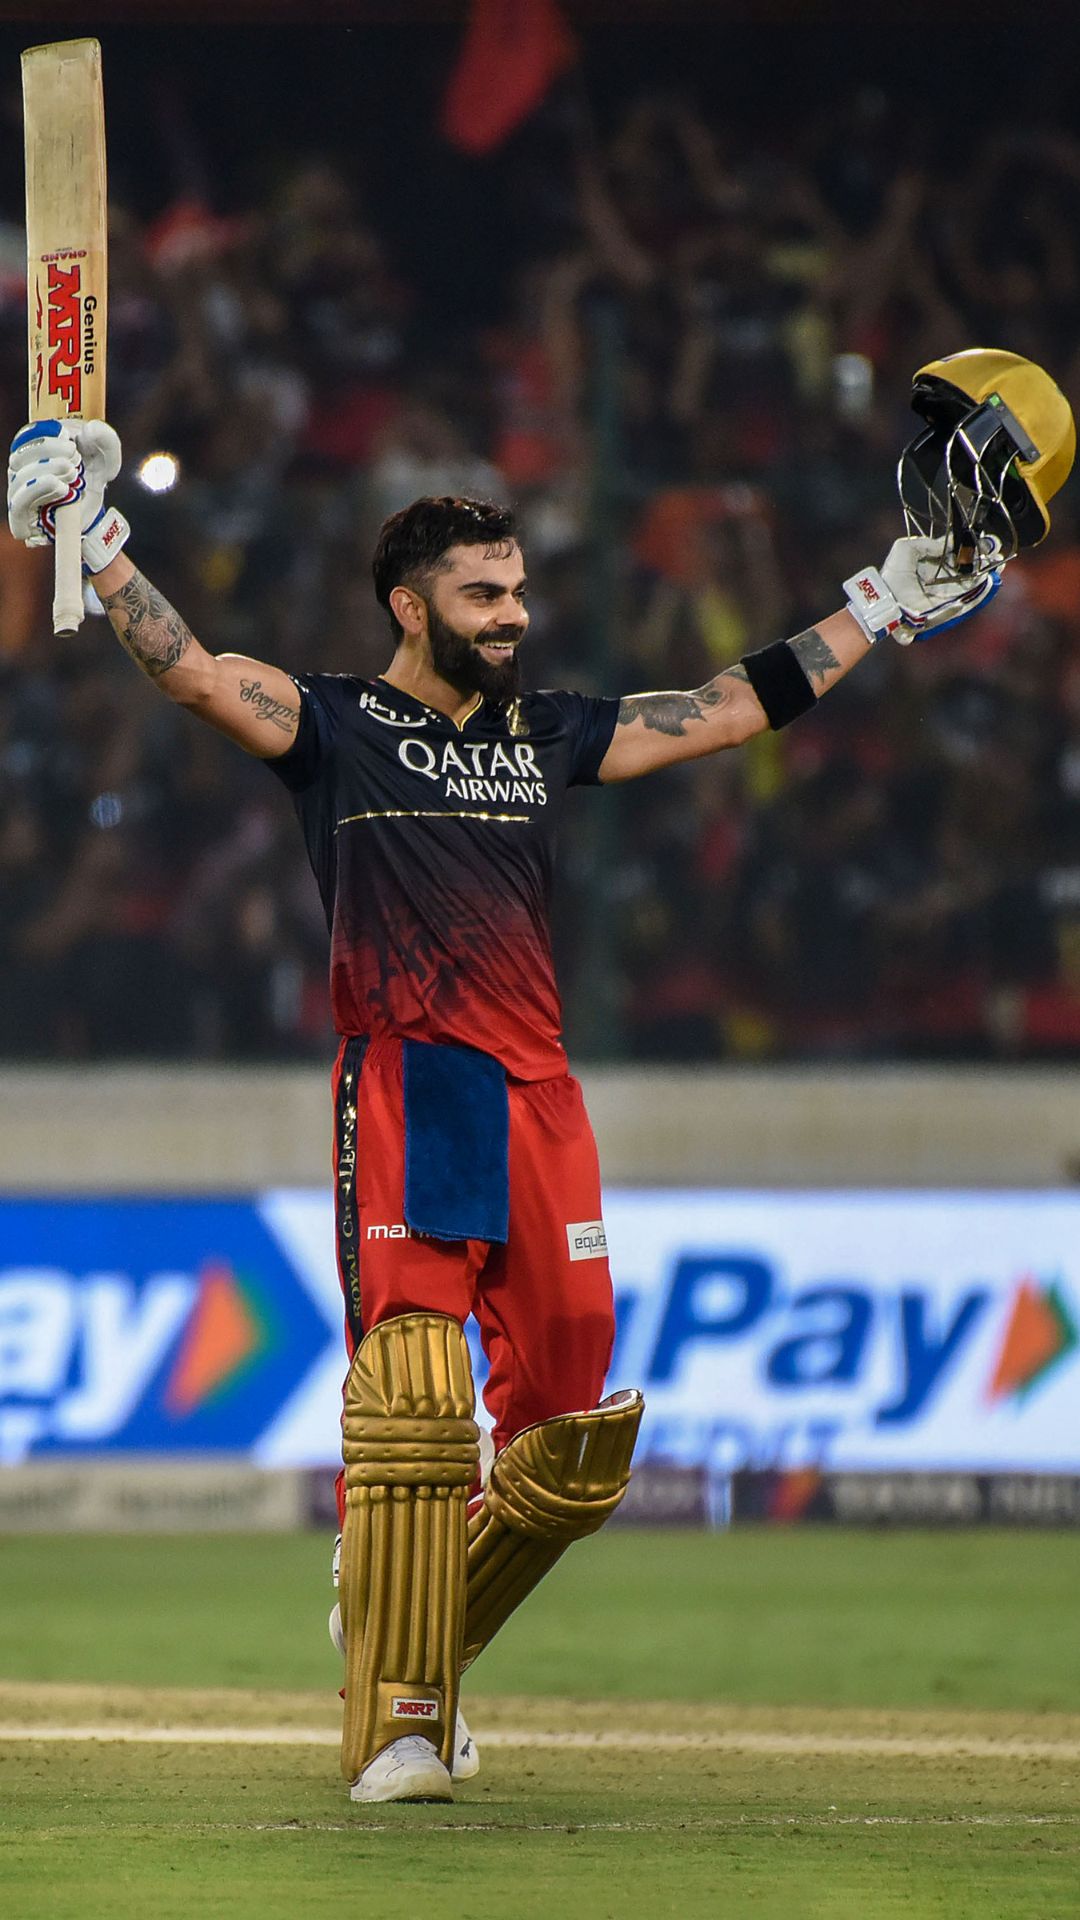 From Virat Kohli to Faf du Plessis, batters with 600-plus runs in IPL history